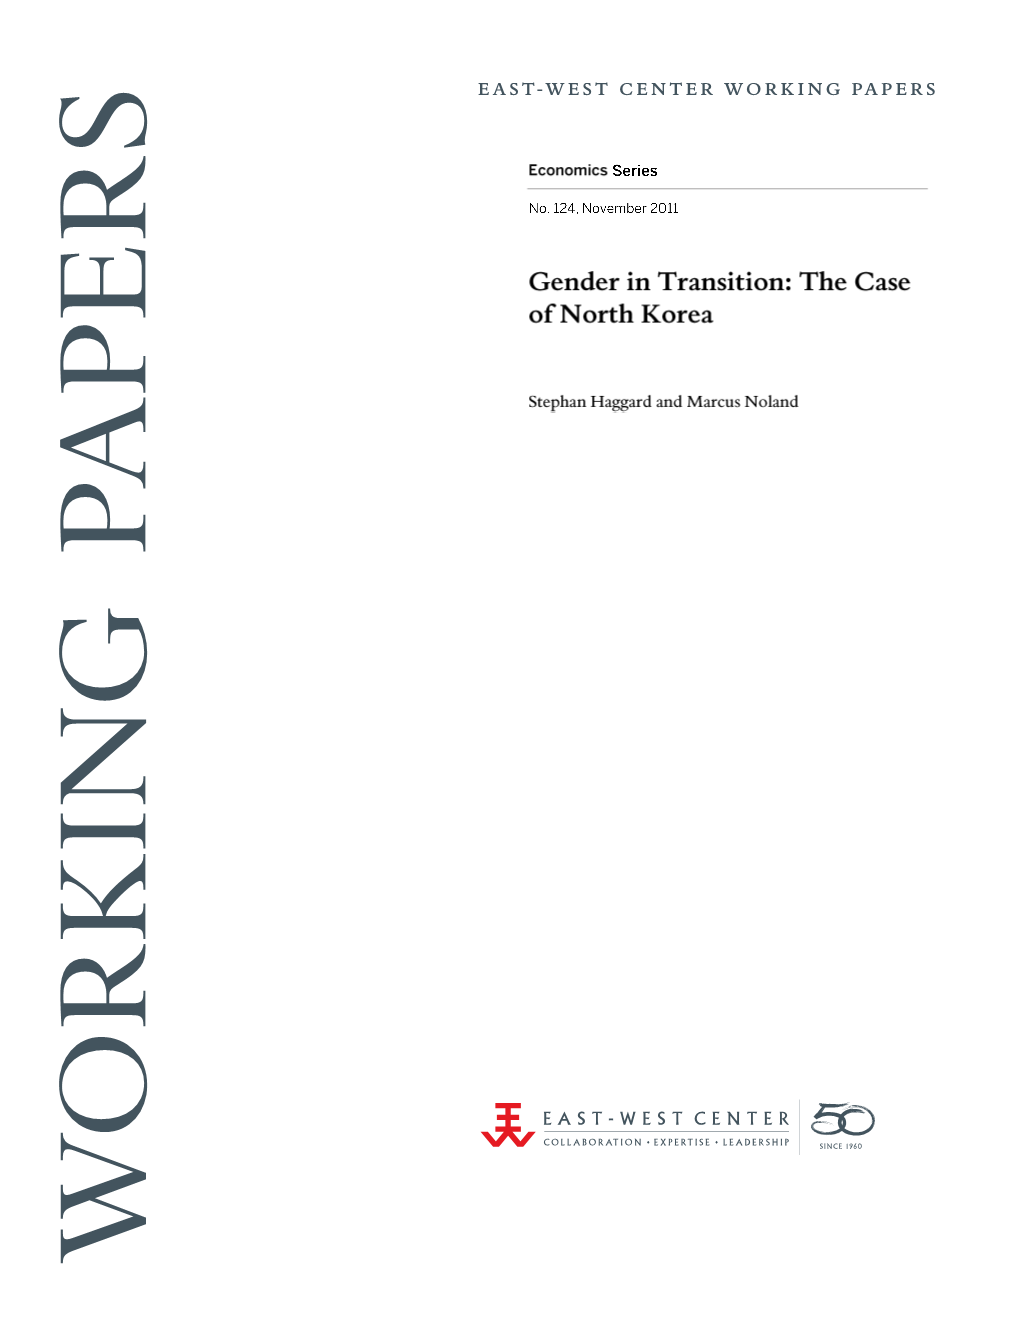 Gender in Transition: the Case of North Korea